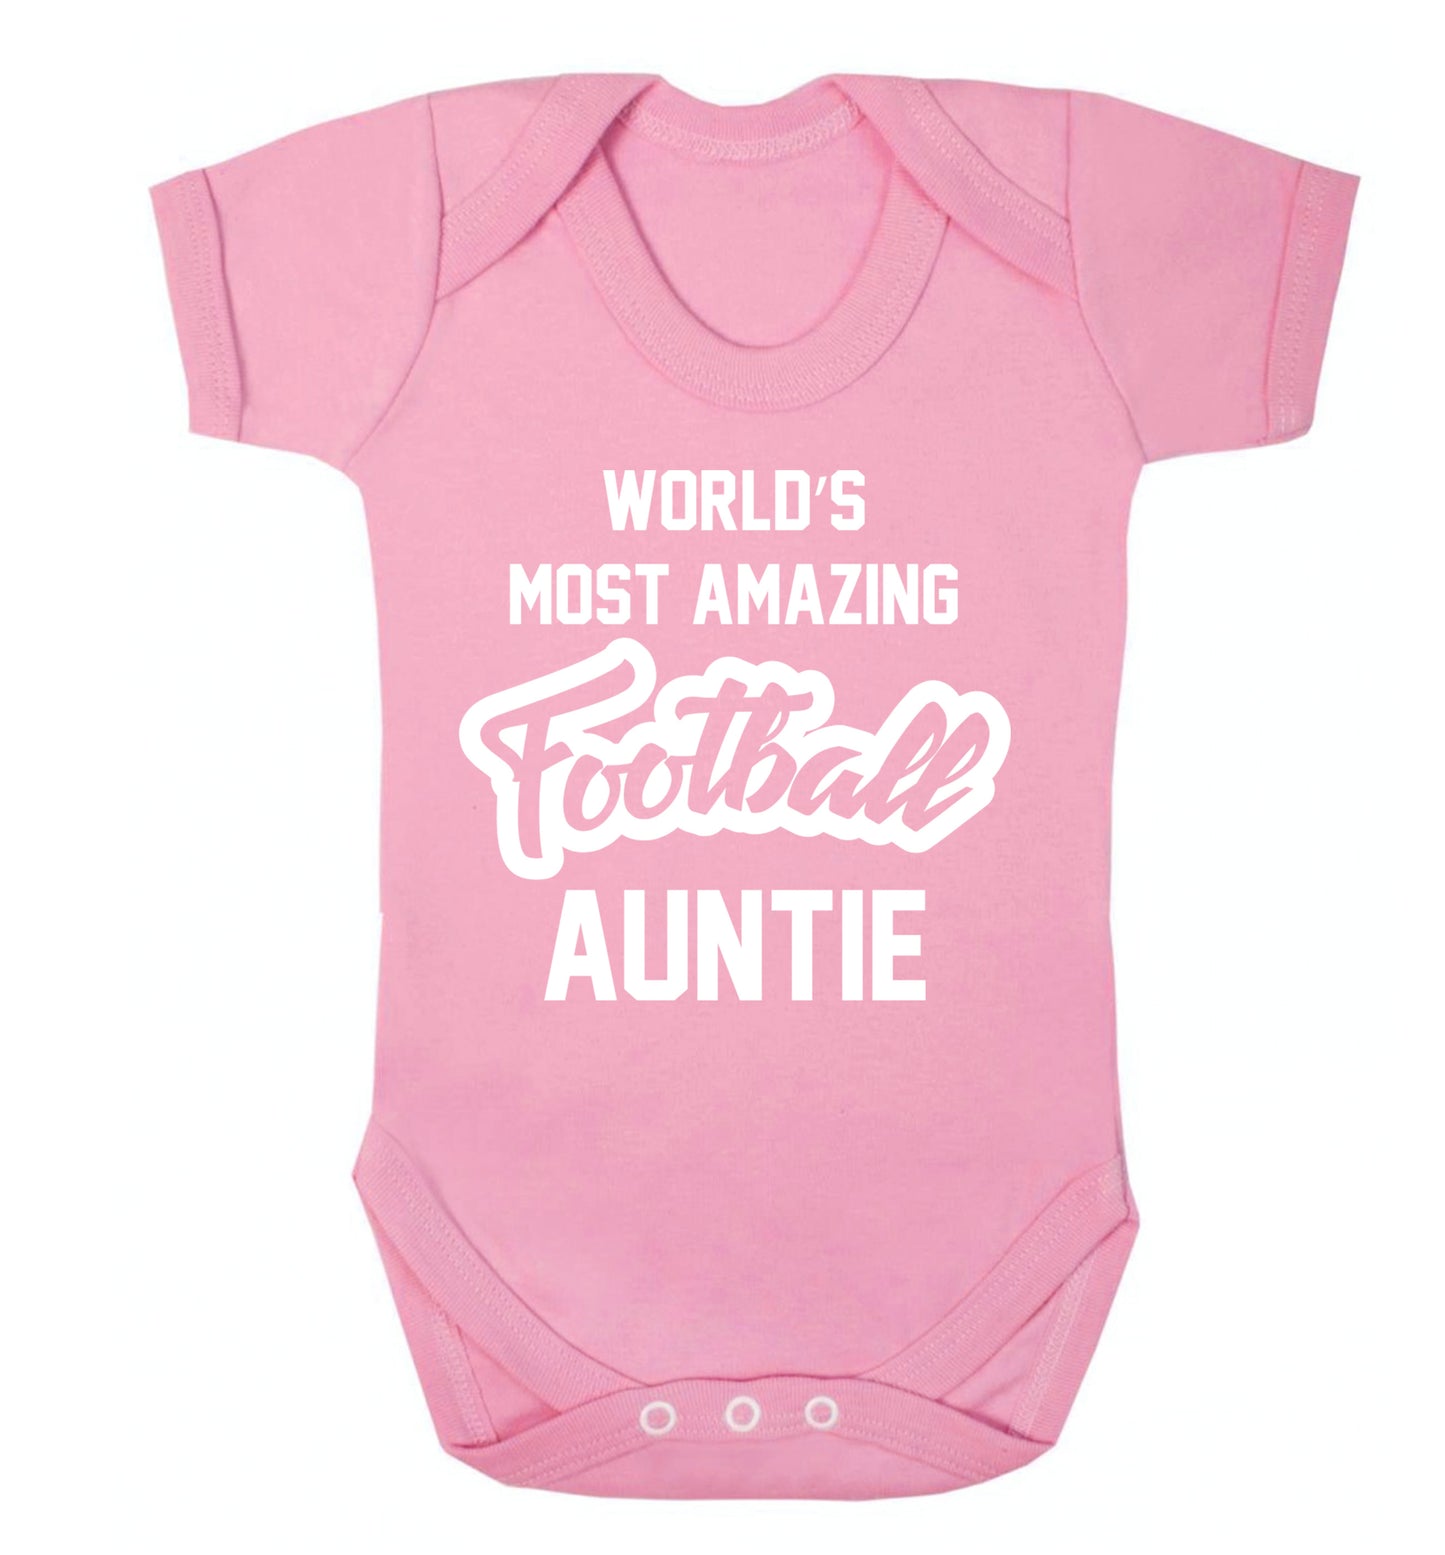 Worlds most amazing football auntie Baby Vest pale pink 18-24 months